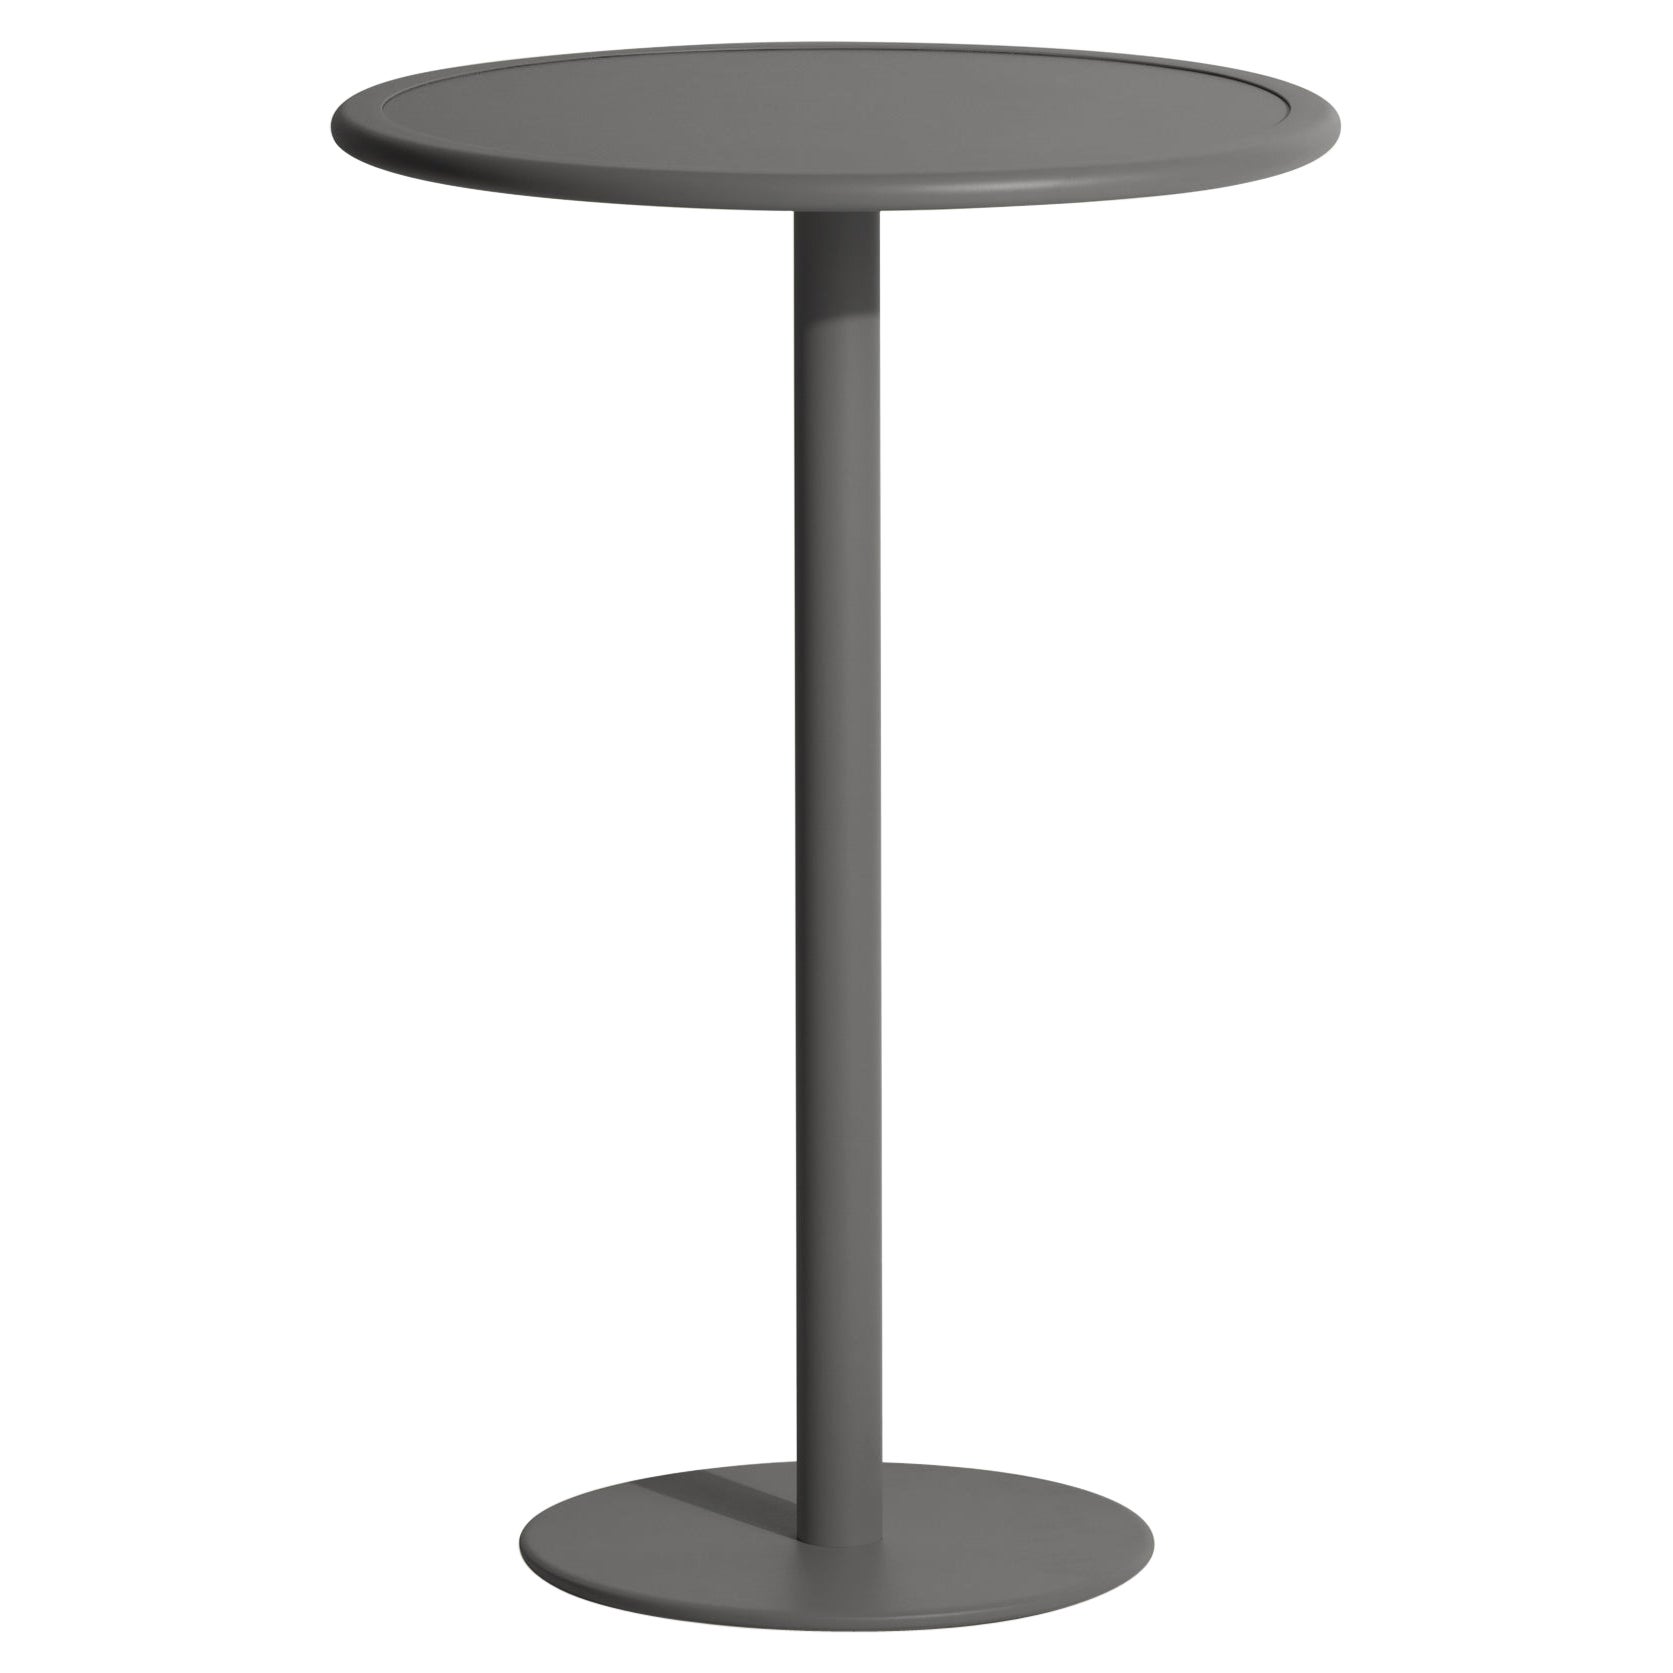 Petite Friture Week-End Round High Table in Anthracite Aluminium, 2017 For Sale